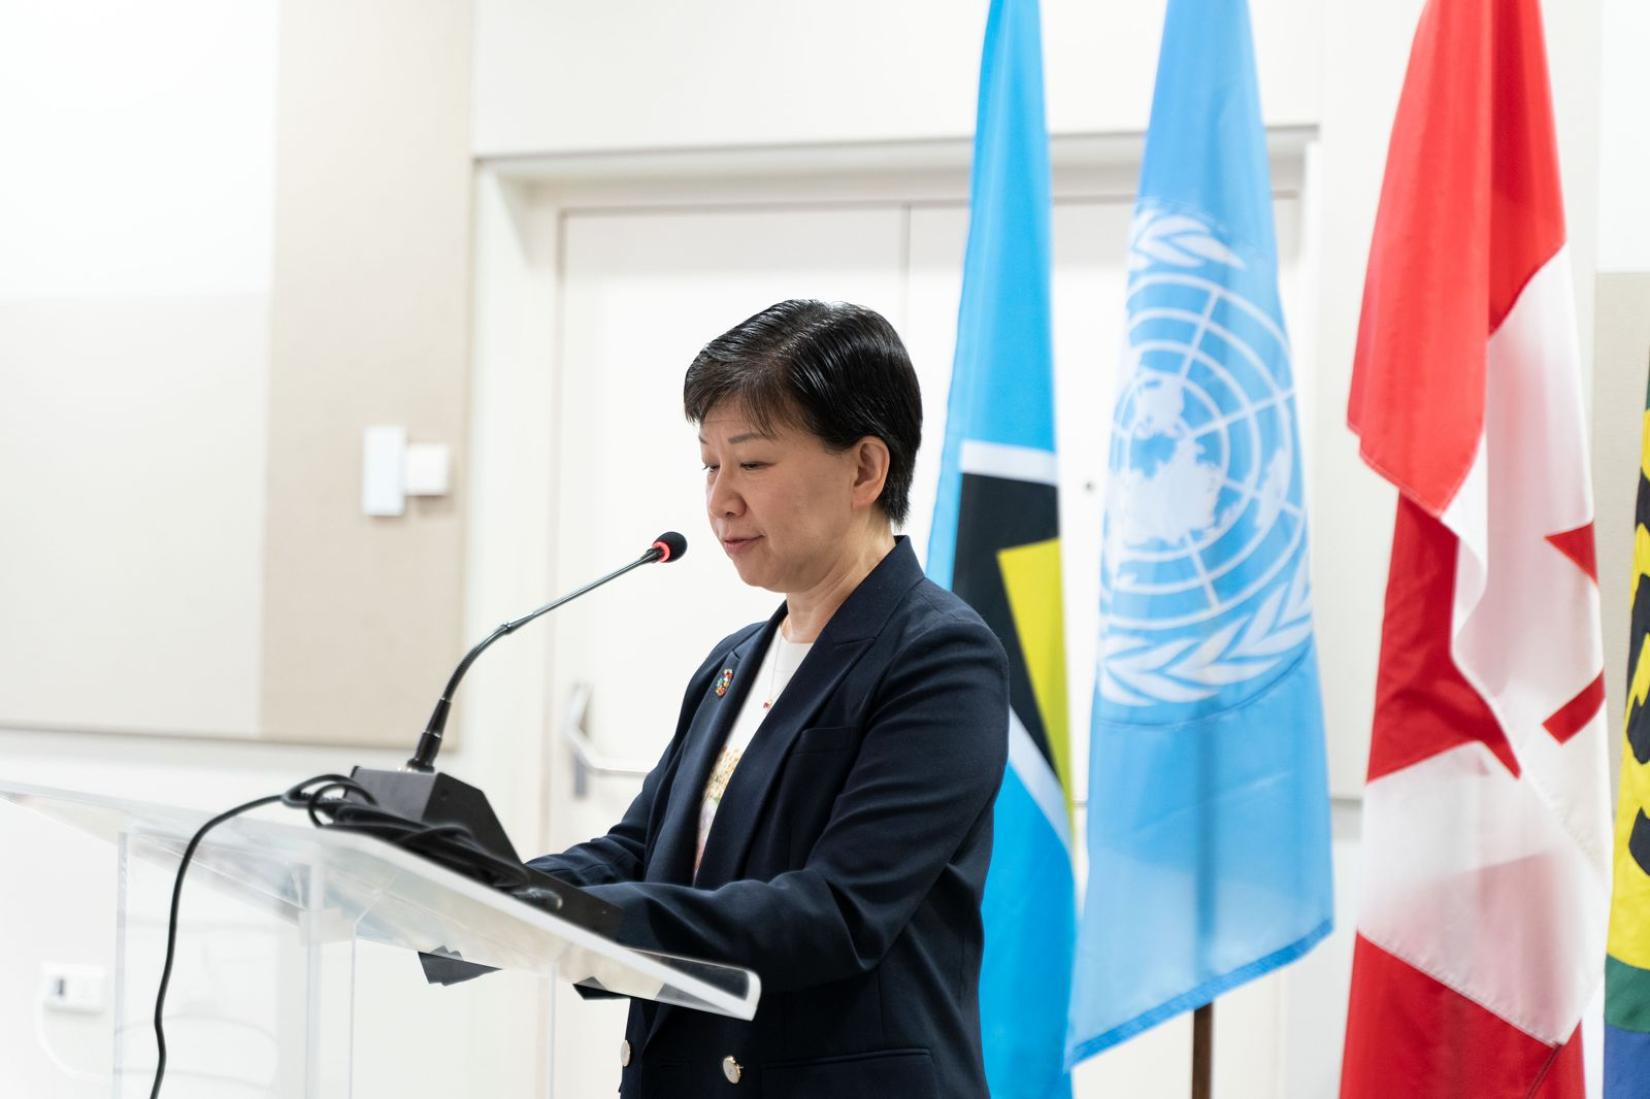 Woman at podium speaking into microphone to an audience with flags behind her. 